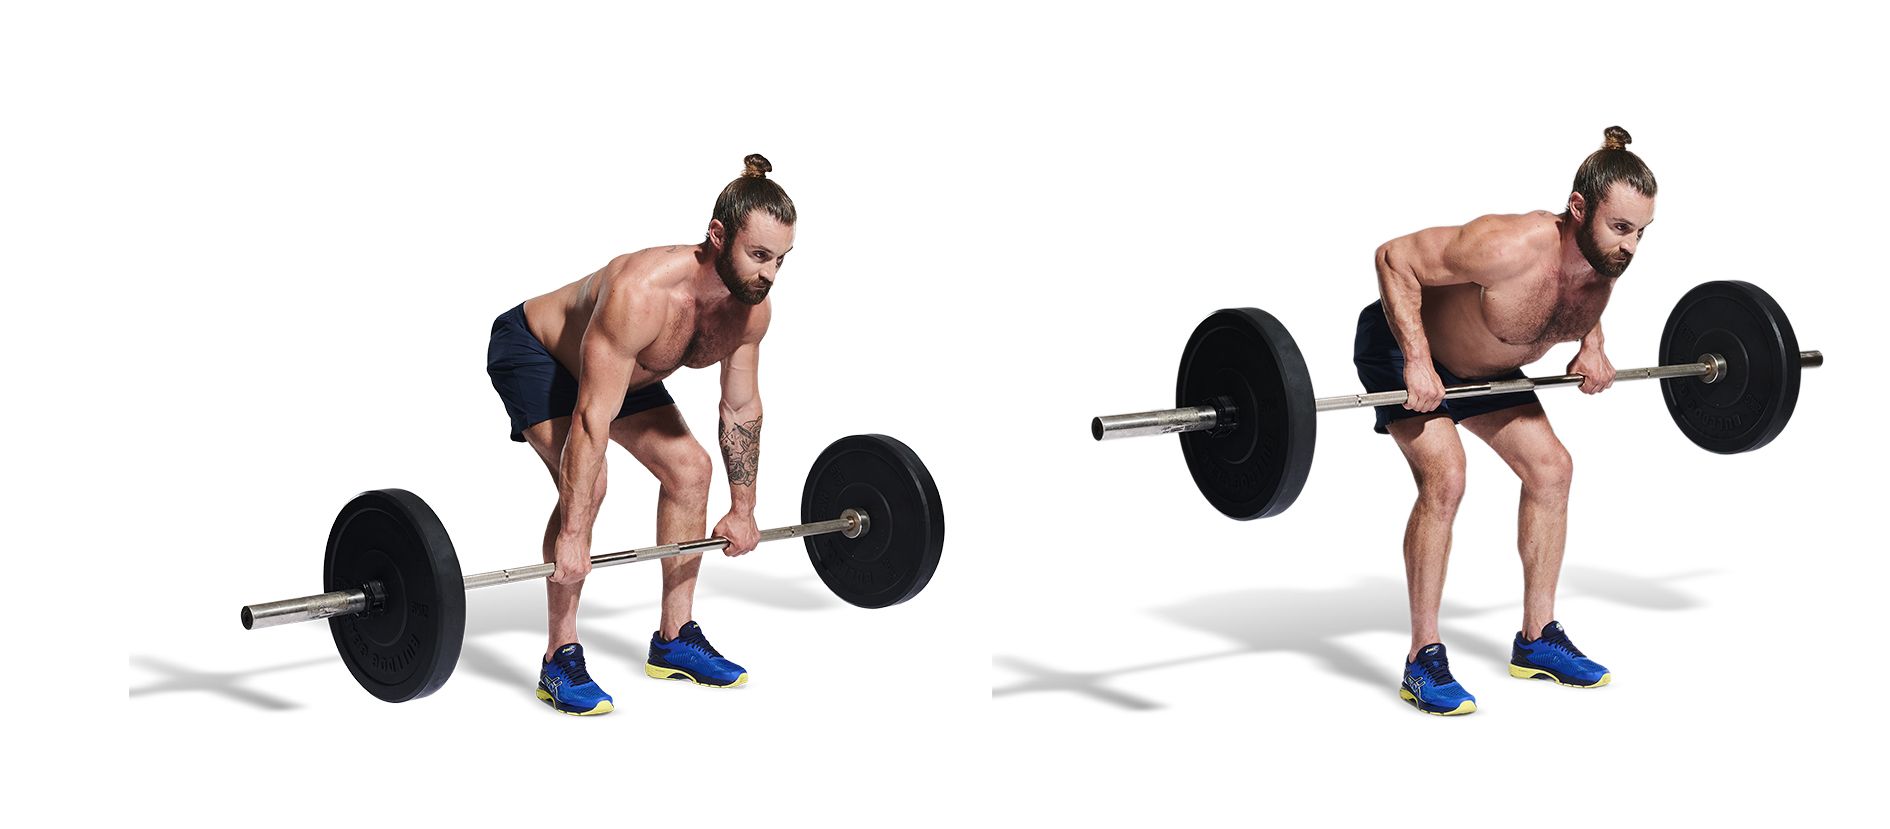 This five-move barbell complex workout strengthens muscles and boosts your  metabolism in 20 minutes